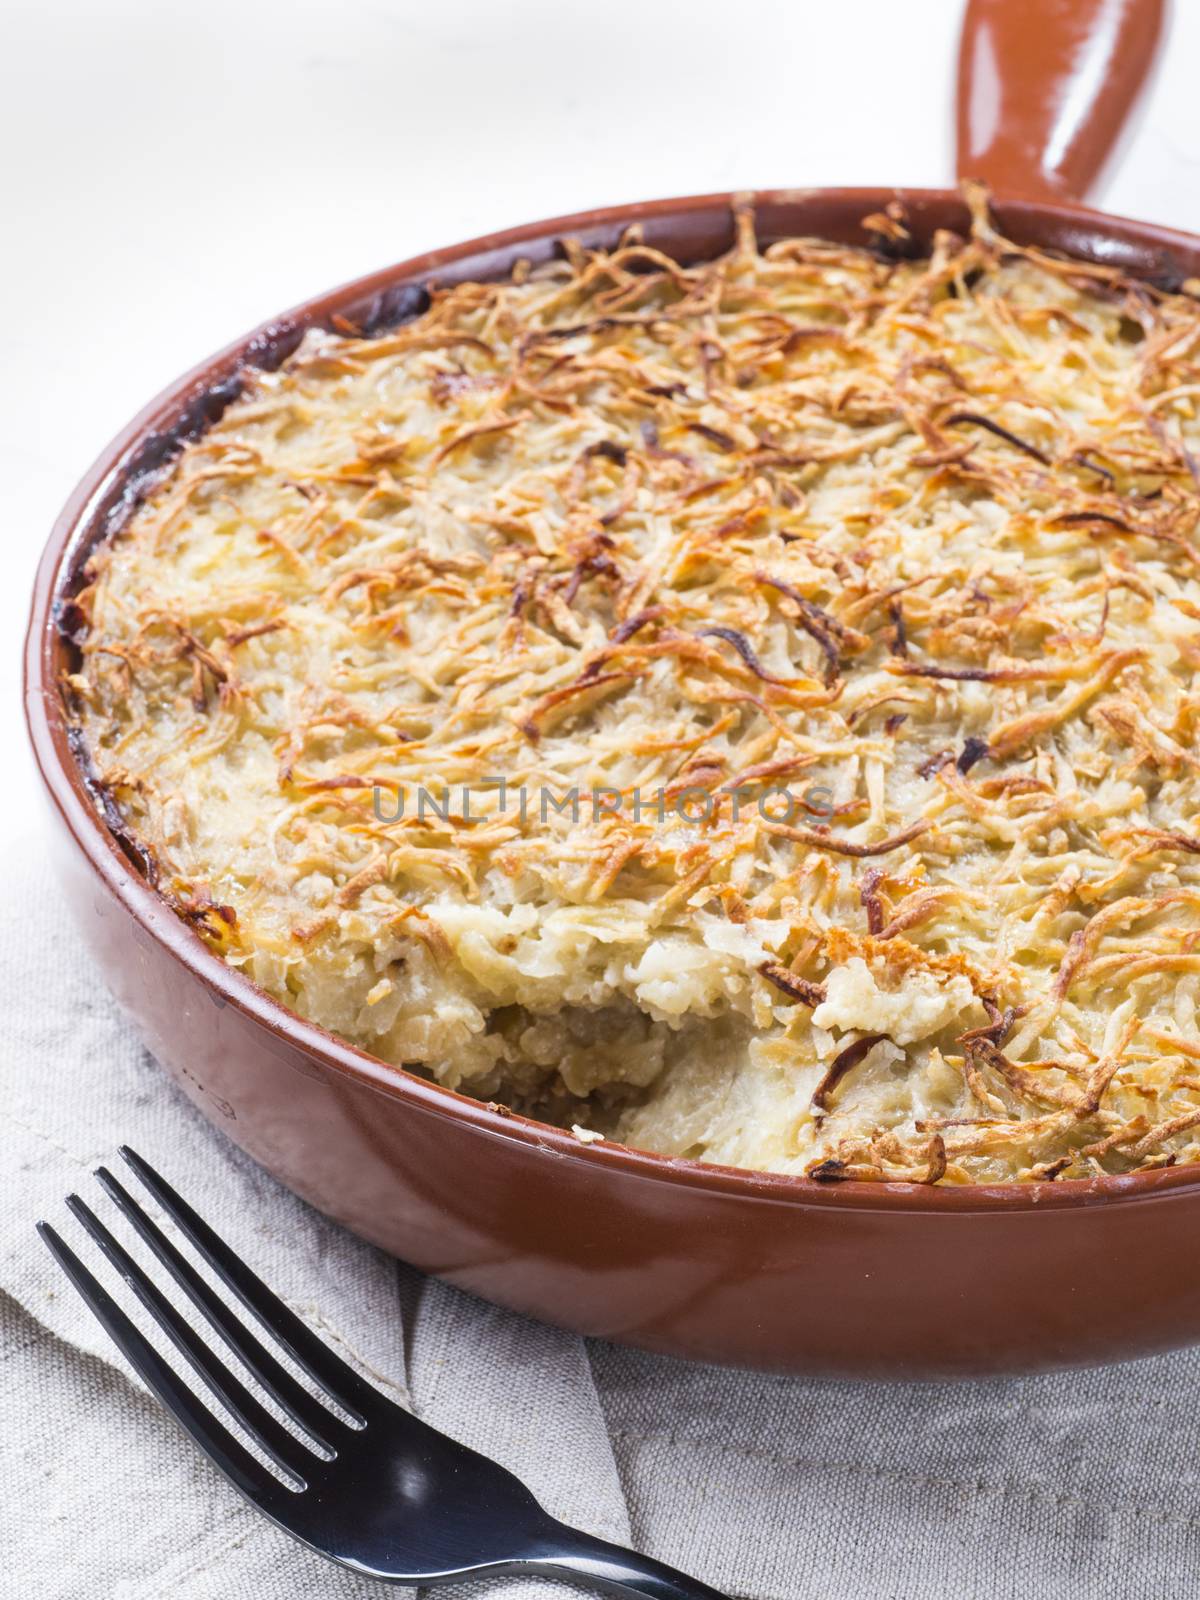 Close up view of appetizing potato casserole with fish, eggs and cream. Potato casserole in serving baking pan on white concrete background